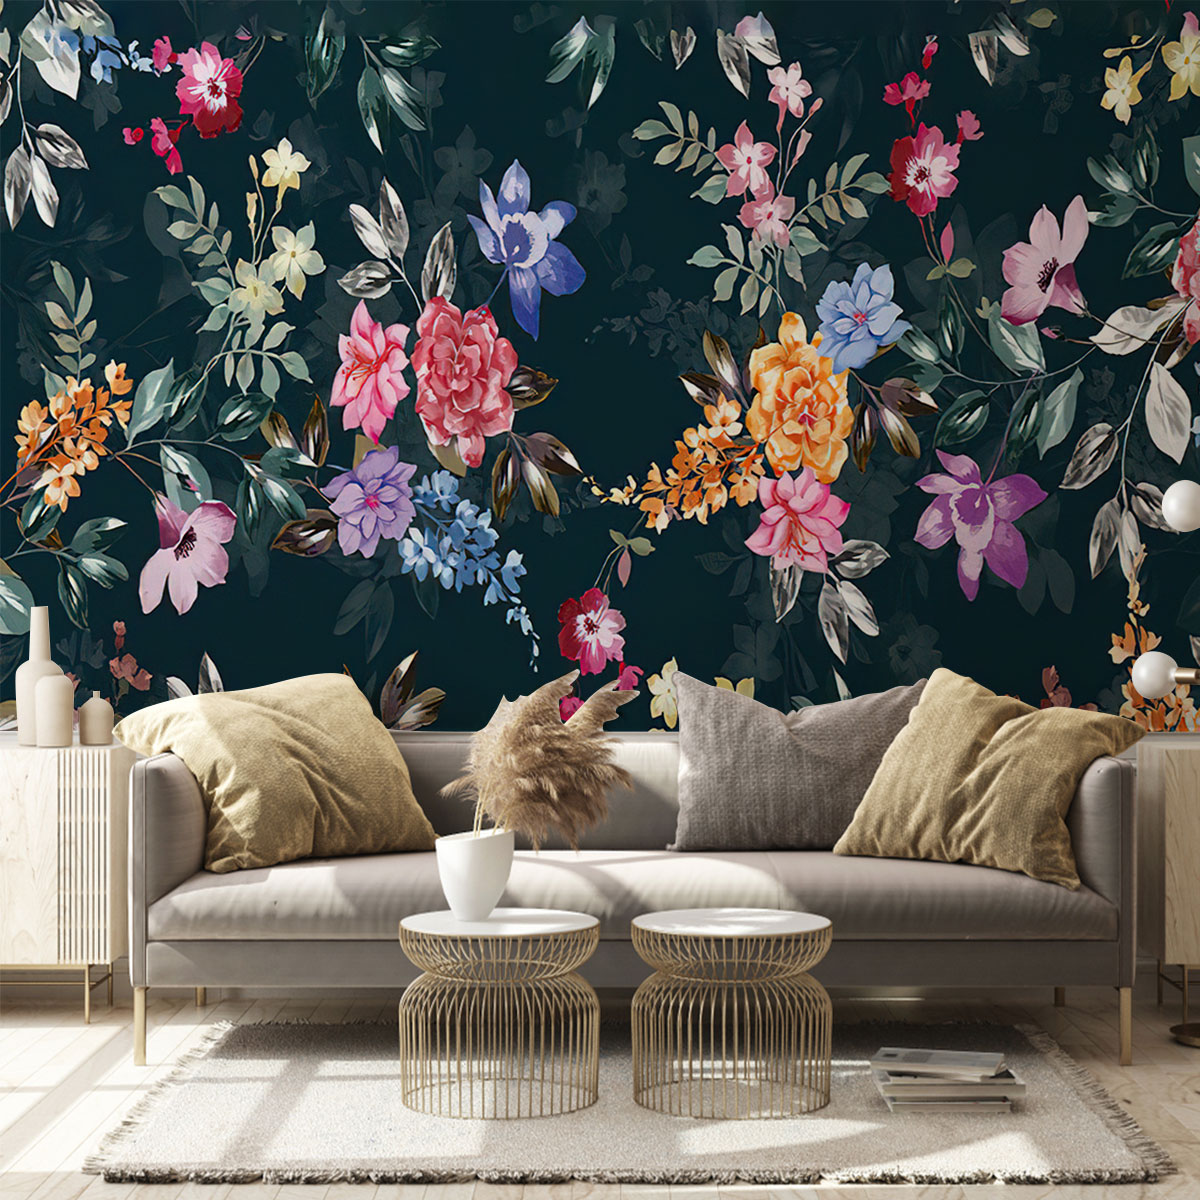 Retro Black Flower And Rose Wall Mural